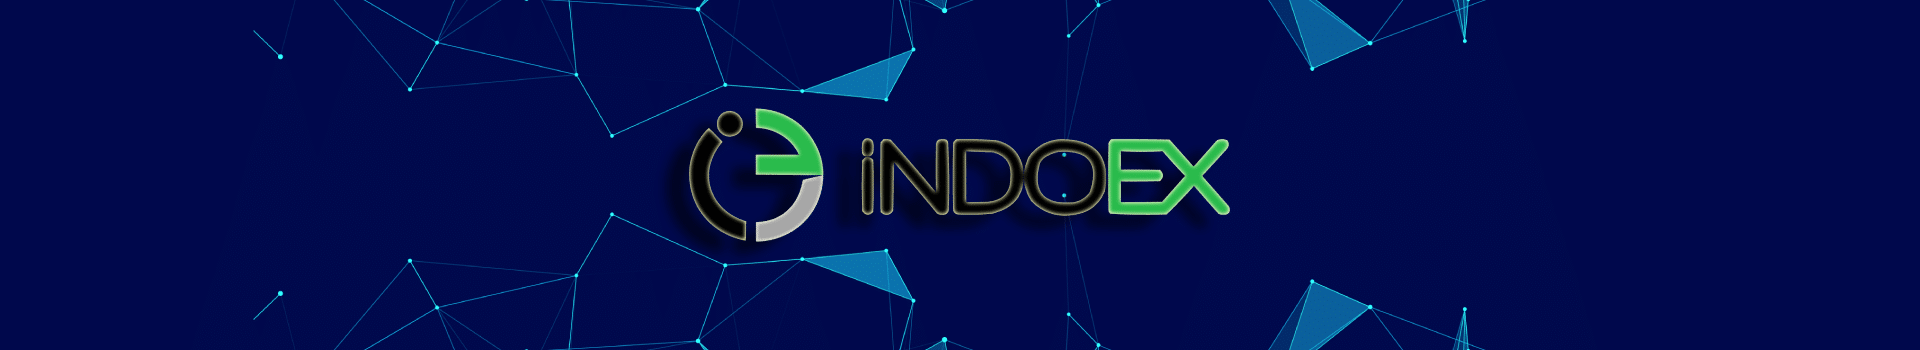 IndoEx Review